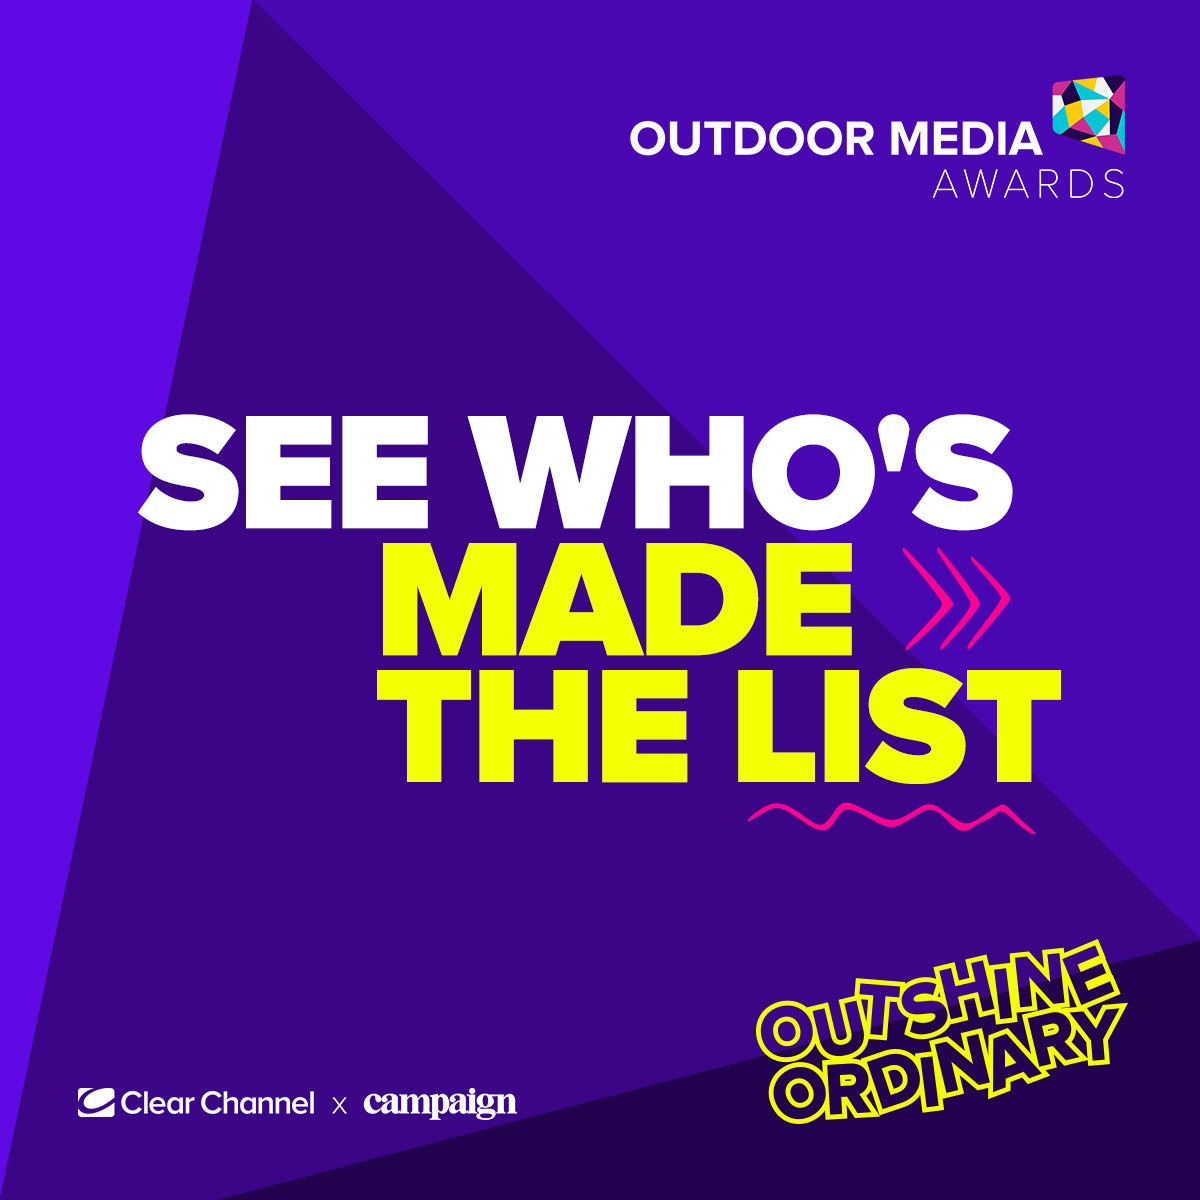 The Outdoor Media Awards SHORTLIST has just dropped!! 🏆 74 outstanding brands & talented individuals have been shortlisted across 12 categories. We look forward to crowning the winners in just 4 weeks time! A huge thank you to everyone who entered and congratulations if you've